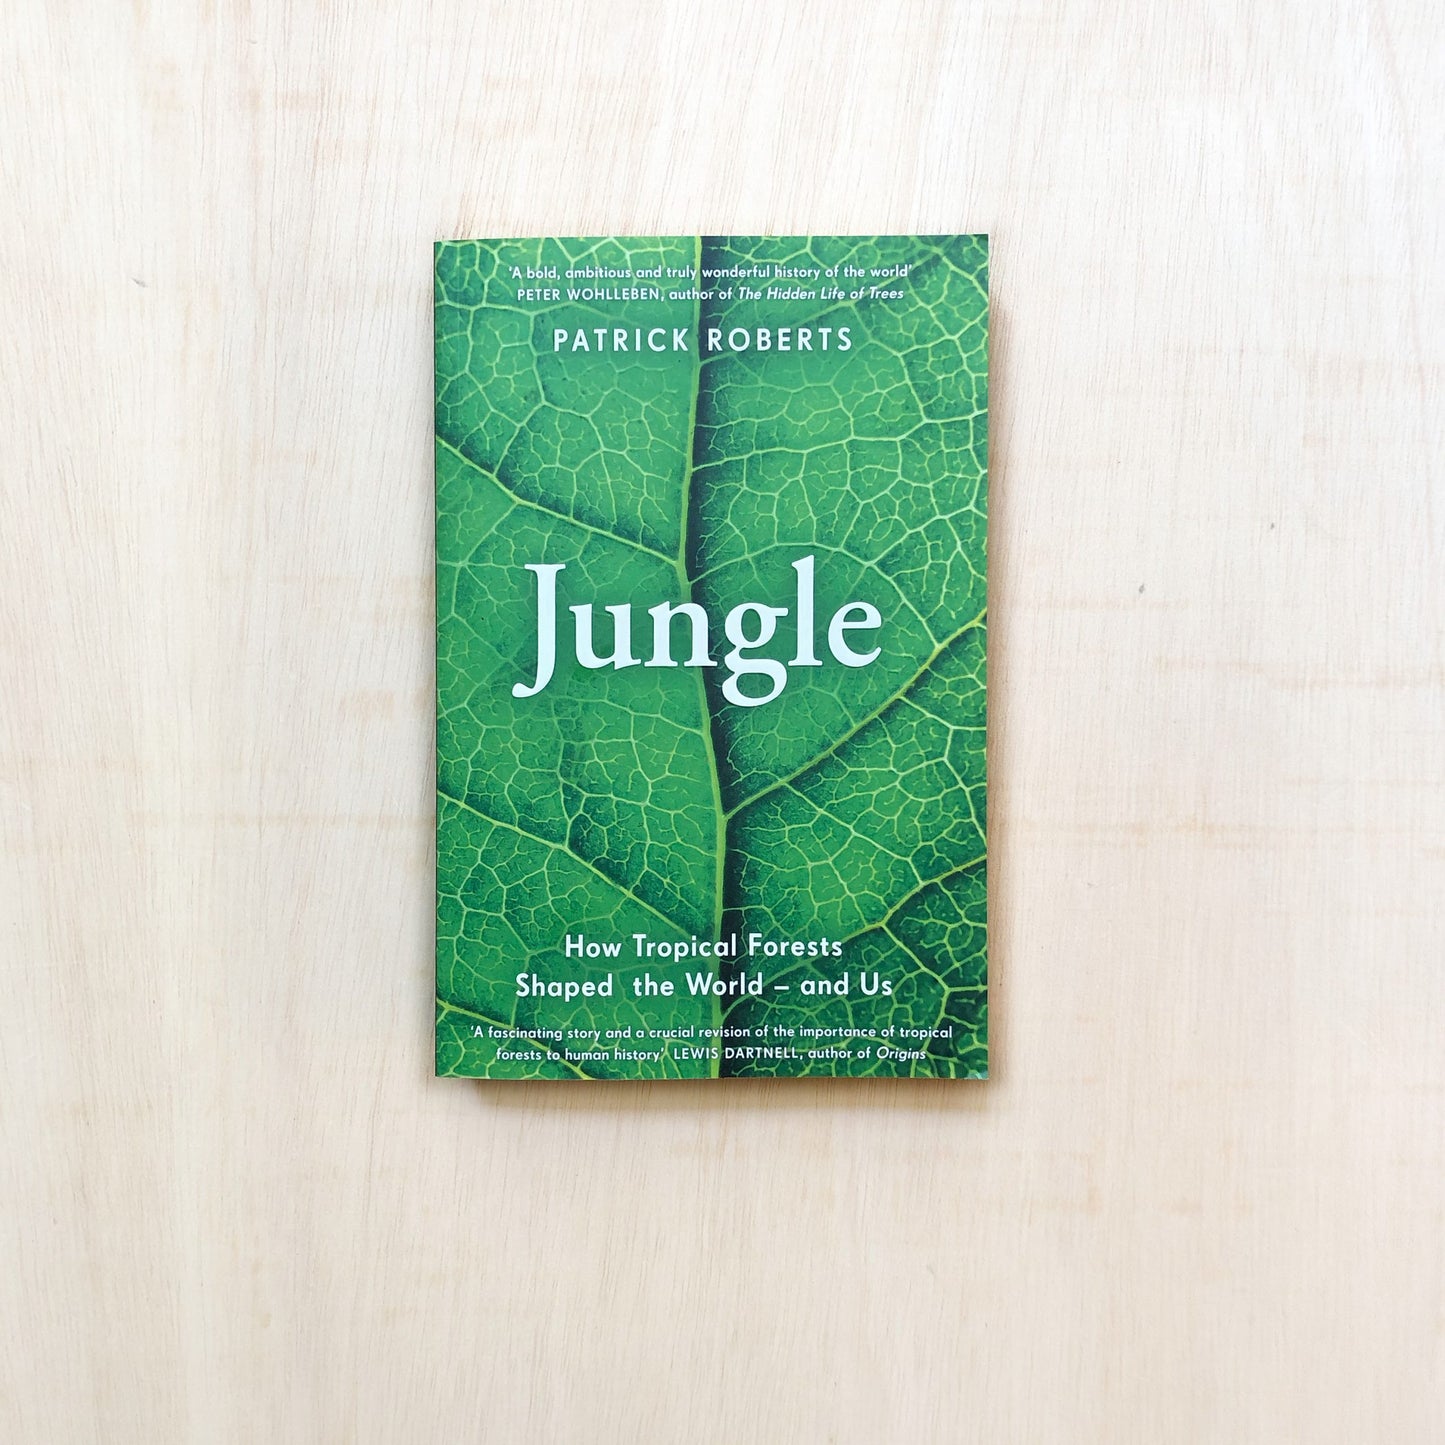 Jungle - How Tropical Forests Shaped the World - and Us